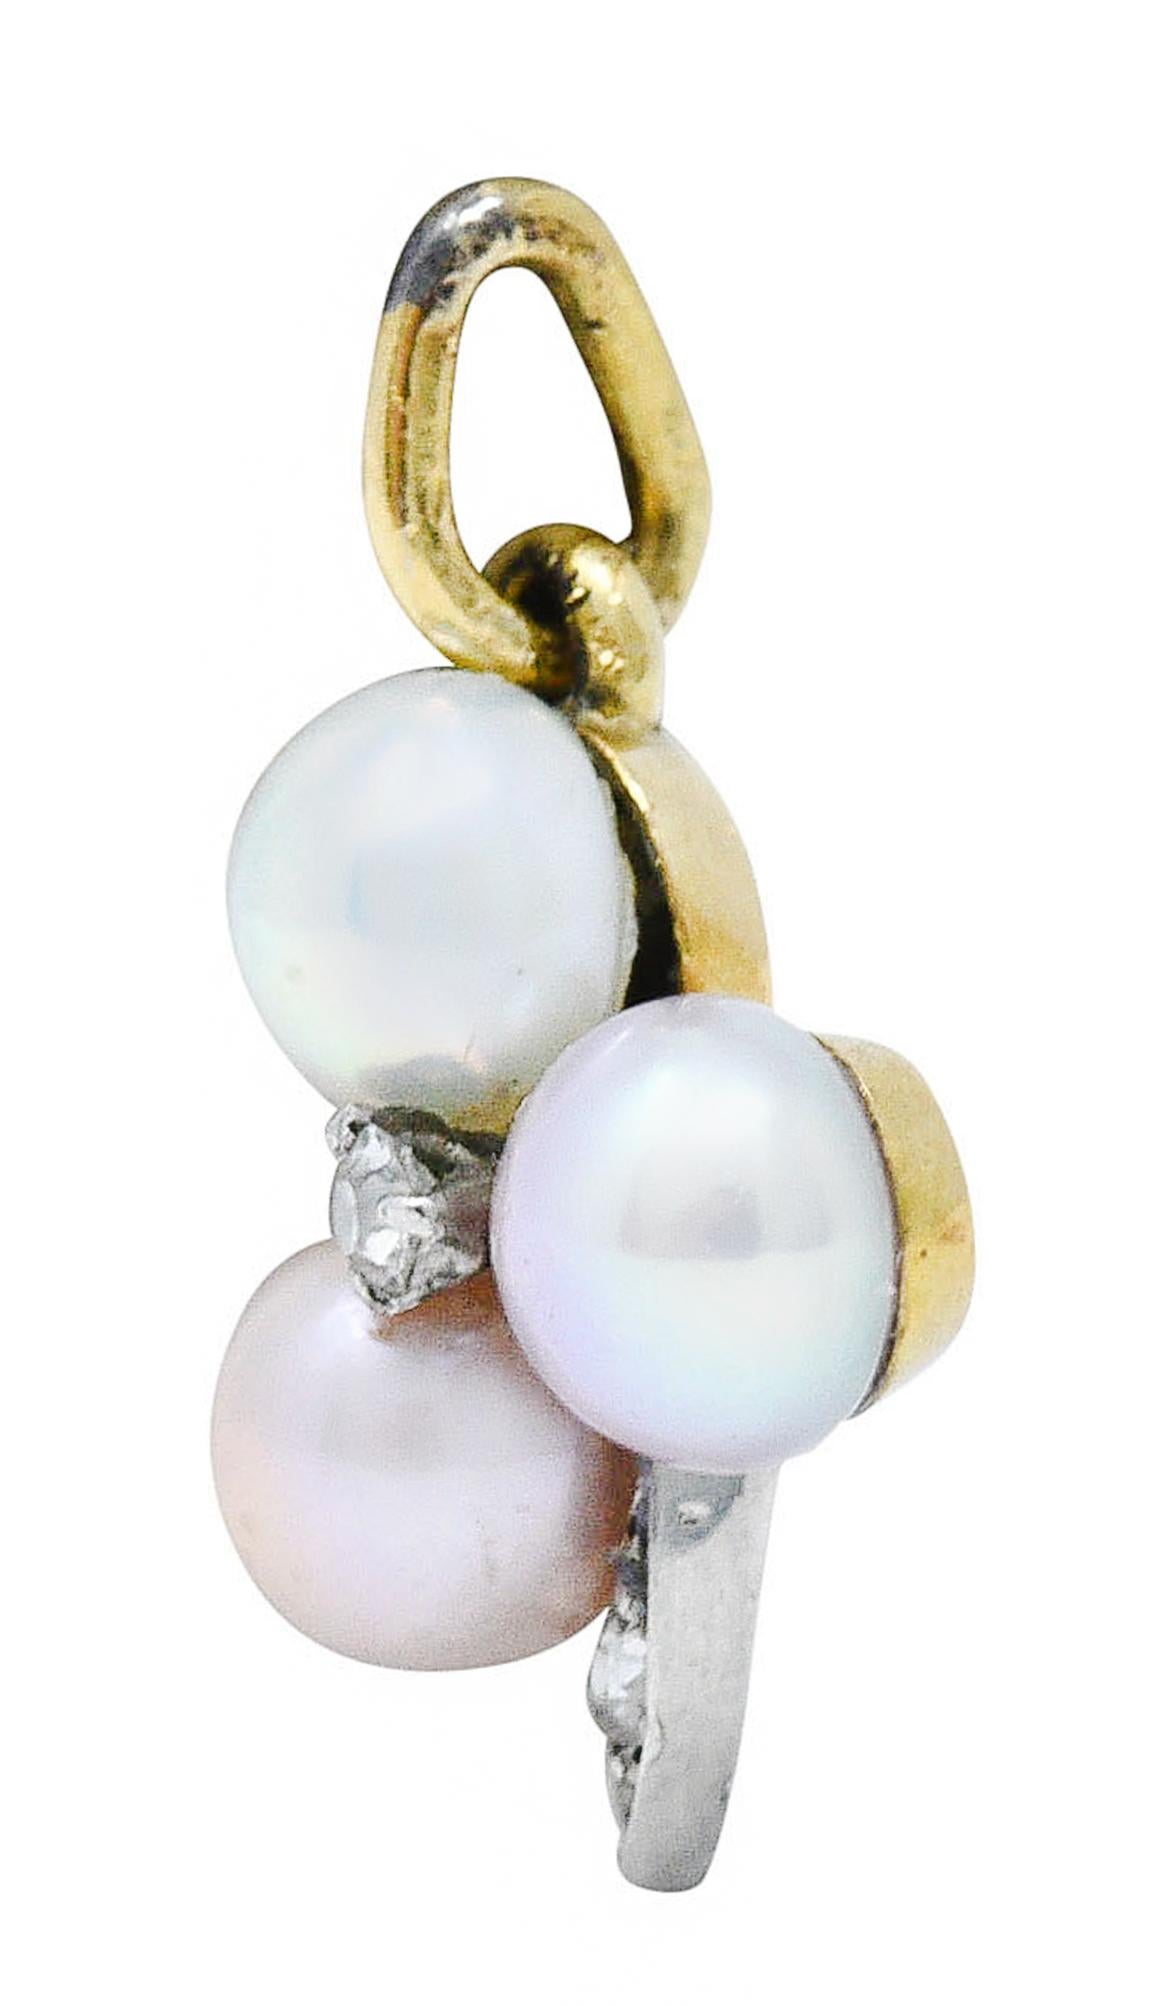 Clover charm is comprised of three 4.2 mm button pearls

Exhibiting strong rosè and iridescent overtones with excellent luster

With single and transitional cut diamonds weighing in total approximately 0.05 - eye clean and white

Tested as platinum